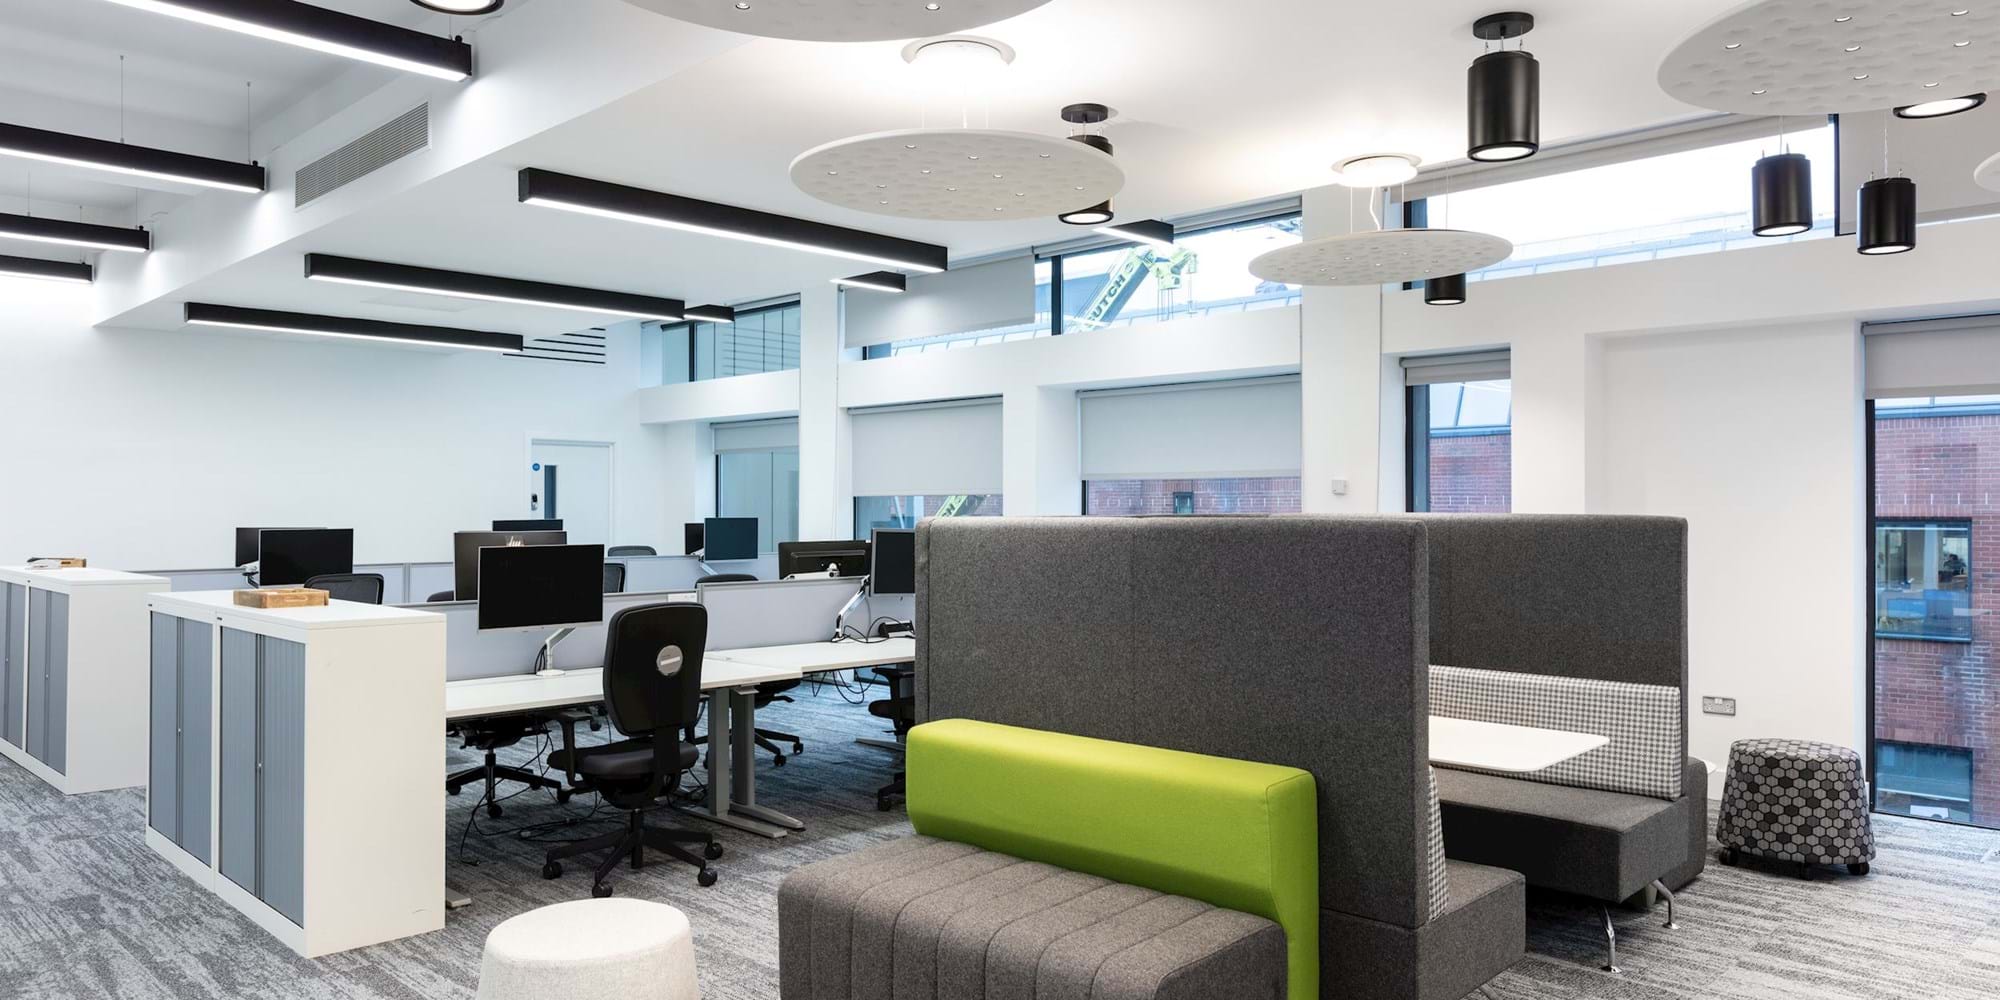 Modus Workspace office design, fit out and refurbishment - Atkins Manchester - Modus_Atkins-49.jpg